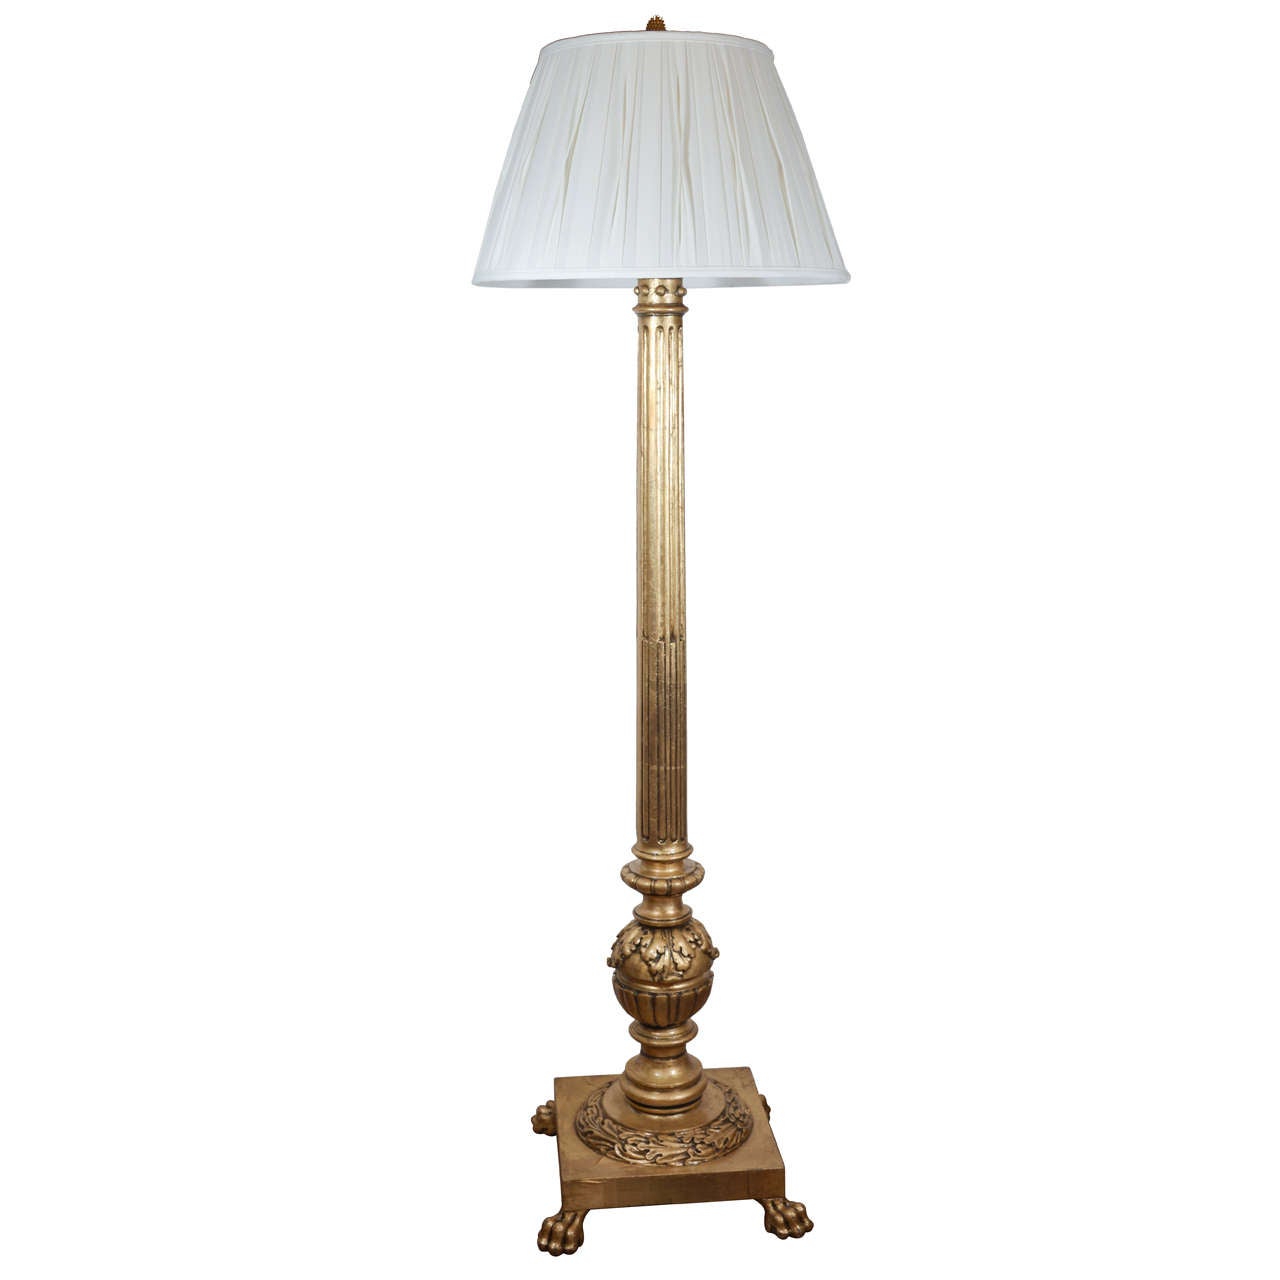 19th c French Empire gilded floor lamp